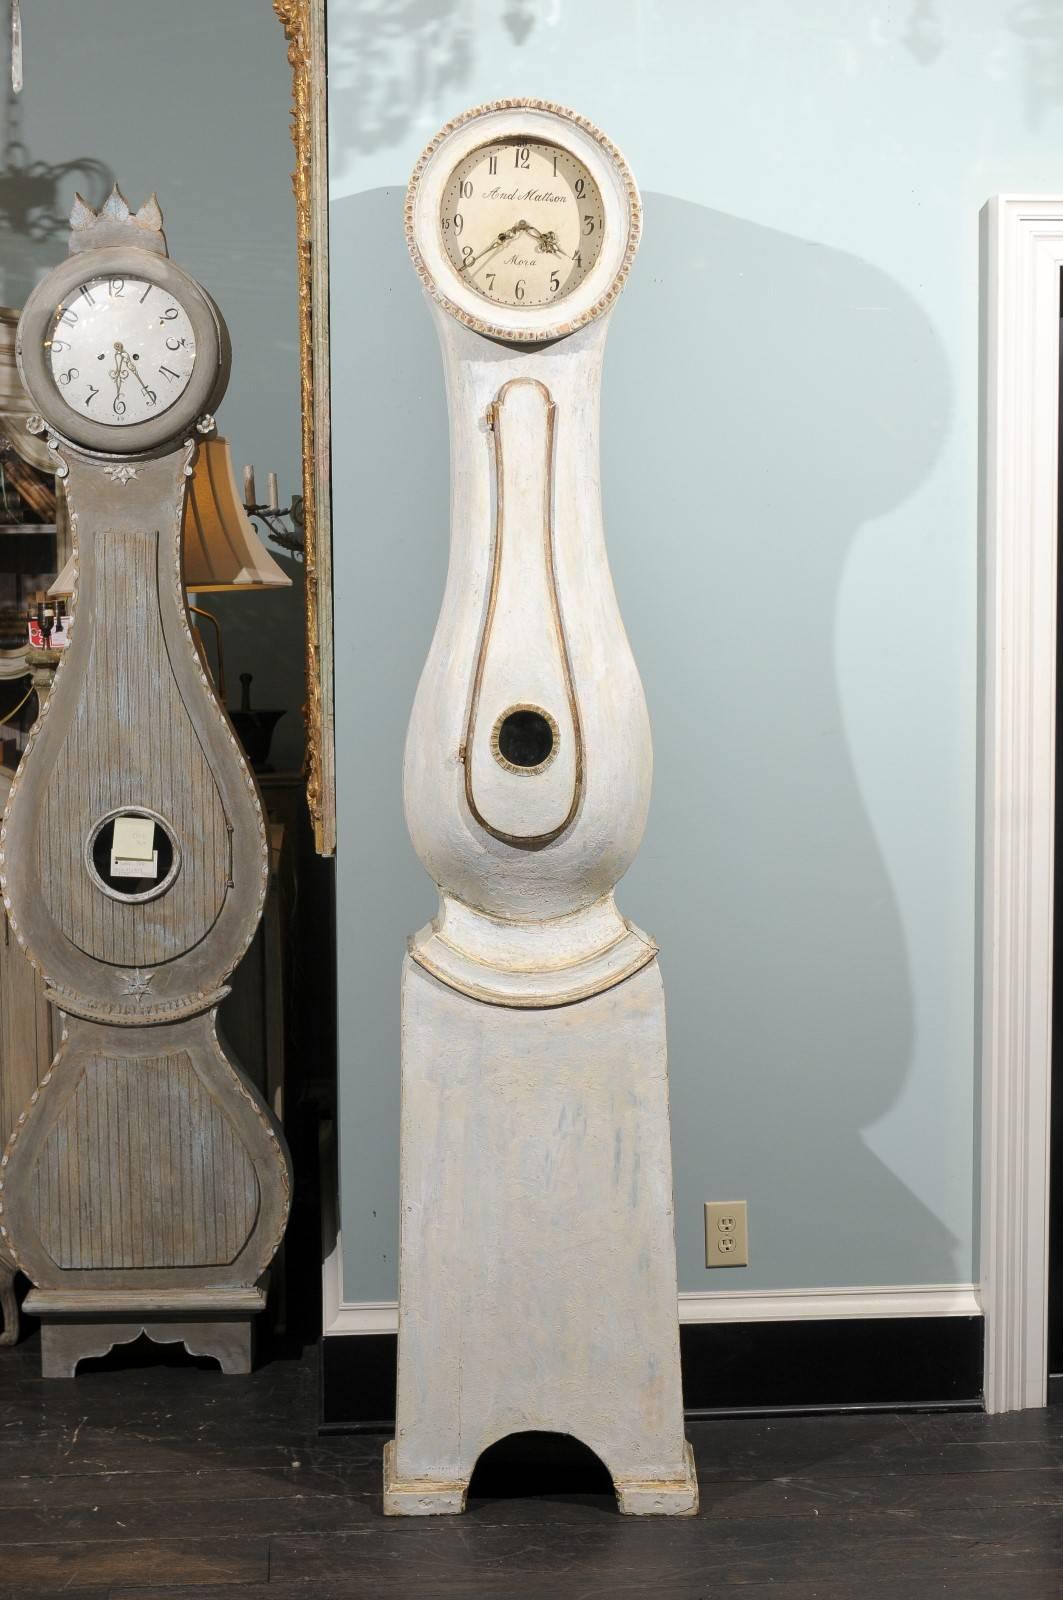 This exquisite Swedish 19th century white with a slight blue undertone and gilded accents clock is a lesson in subtlety. This clock retains it's original metal face, hands and movement.  From its elegant curves to the straightforward simplicity of